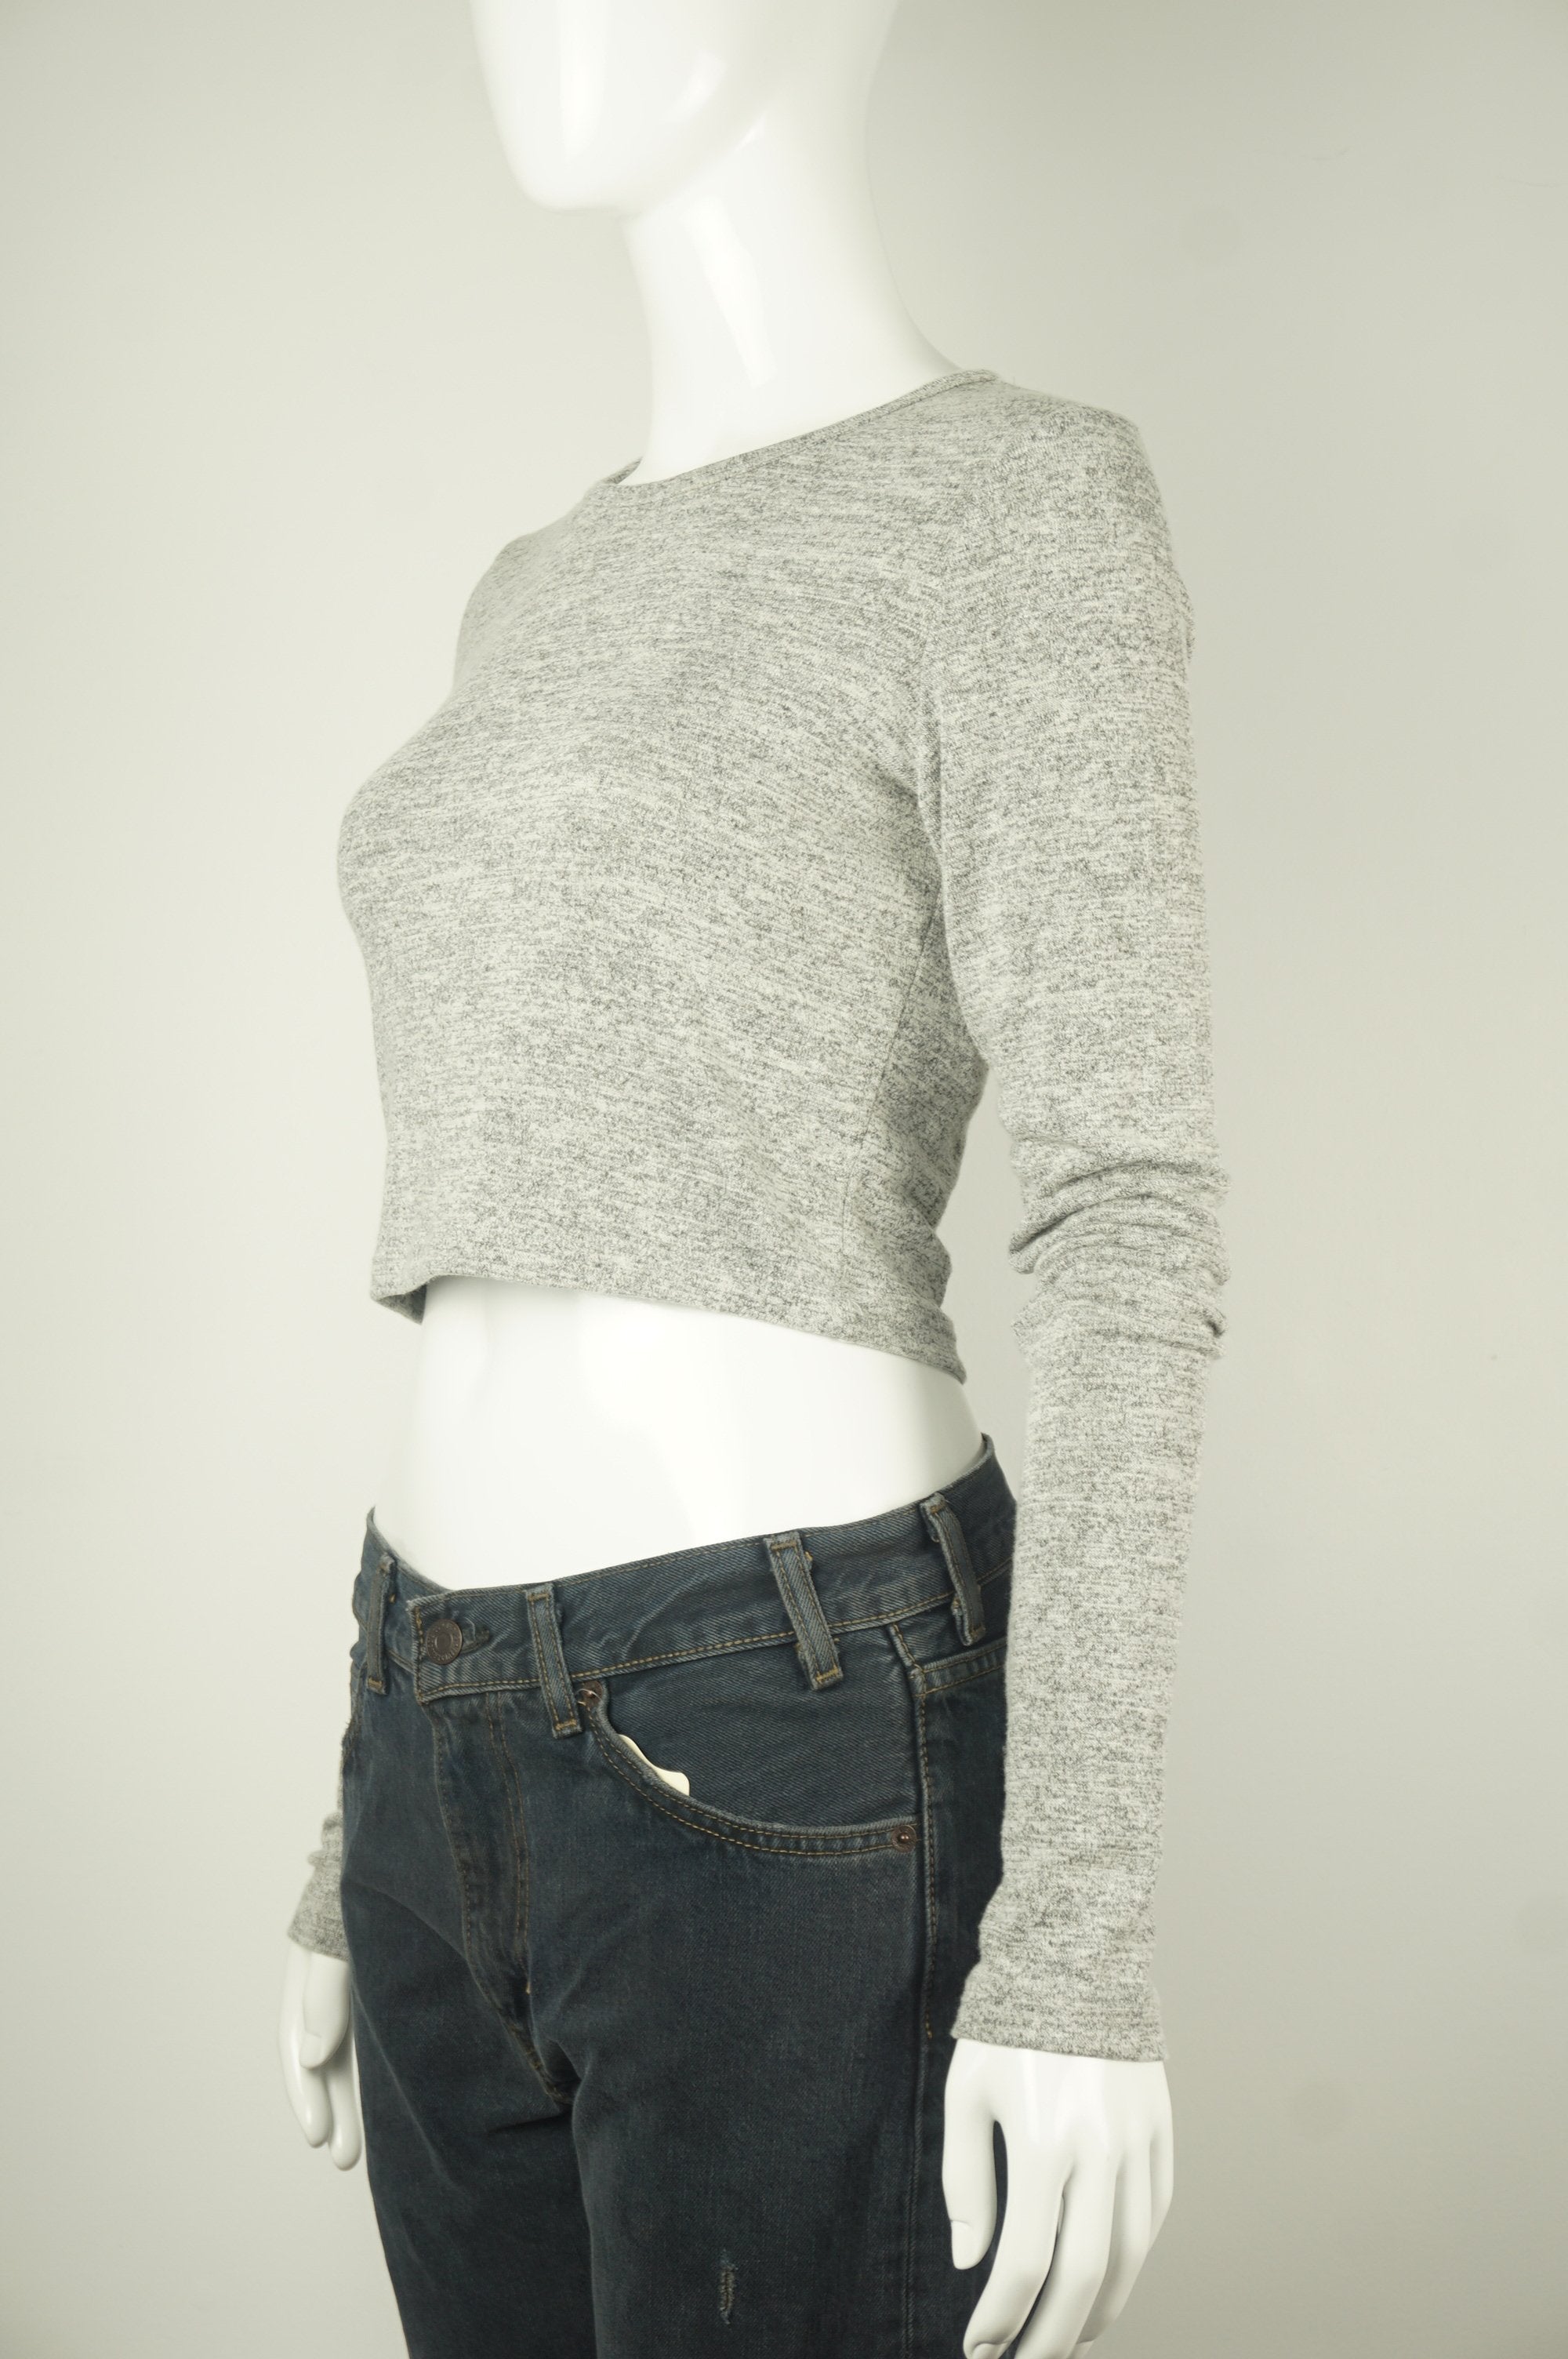 Wilfred Free Long sleeve crop top, The cropped fit is easy to wear and perfect for the season — plus it looks fantastic with high-waisted bottoms. The soft, stretchy fabric feels so amazing to wear, you're not going to want to take it off! , Grey, 48% Rayon, 48% Polyester, 4% Spandex, women's Tops, women's Grey Tops, Wilfred Free women's Tops, wilfred long sleeve crop top, aritzia women's soft crop top